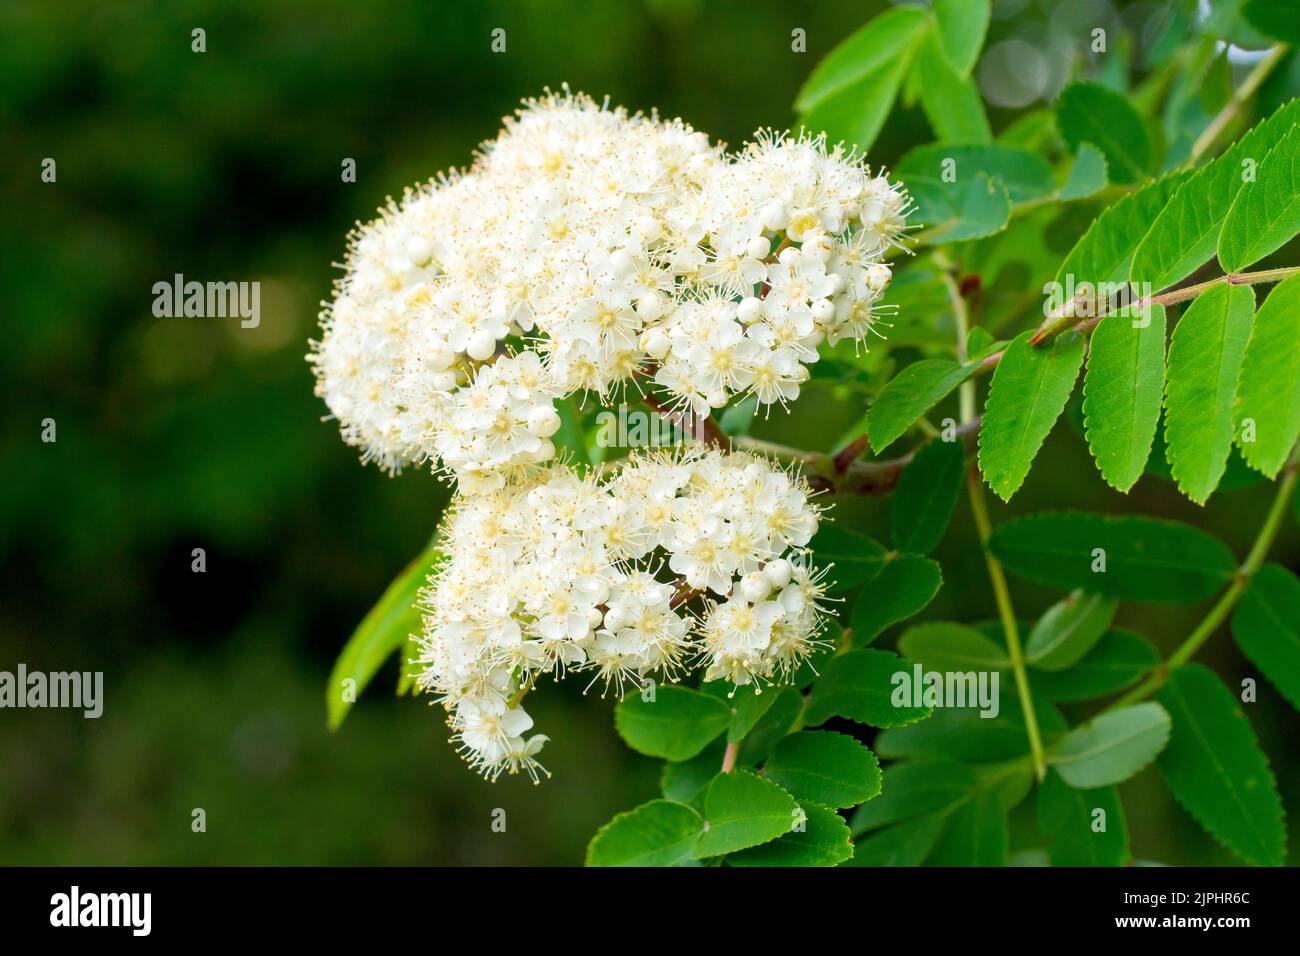 Rowan or Mountain Ash (sorbus aucuparia), close up of a solitary spray of white flowers and the distinctive leaves of the tree. Stock Photo